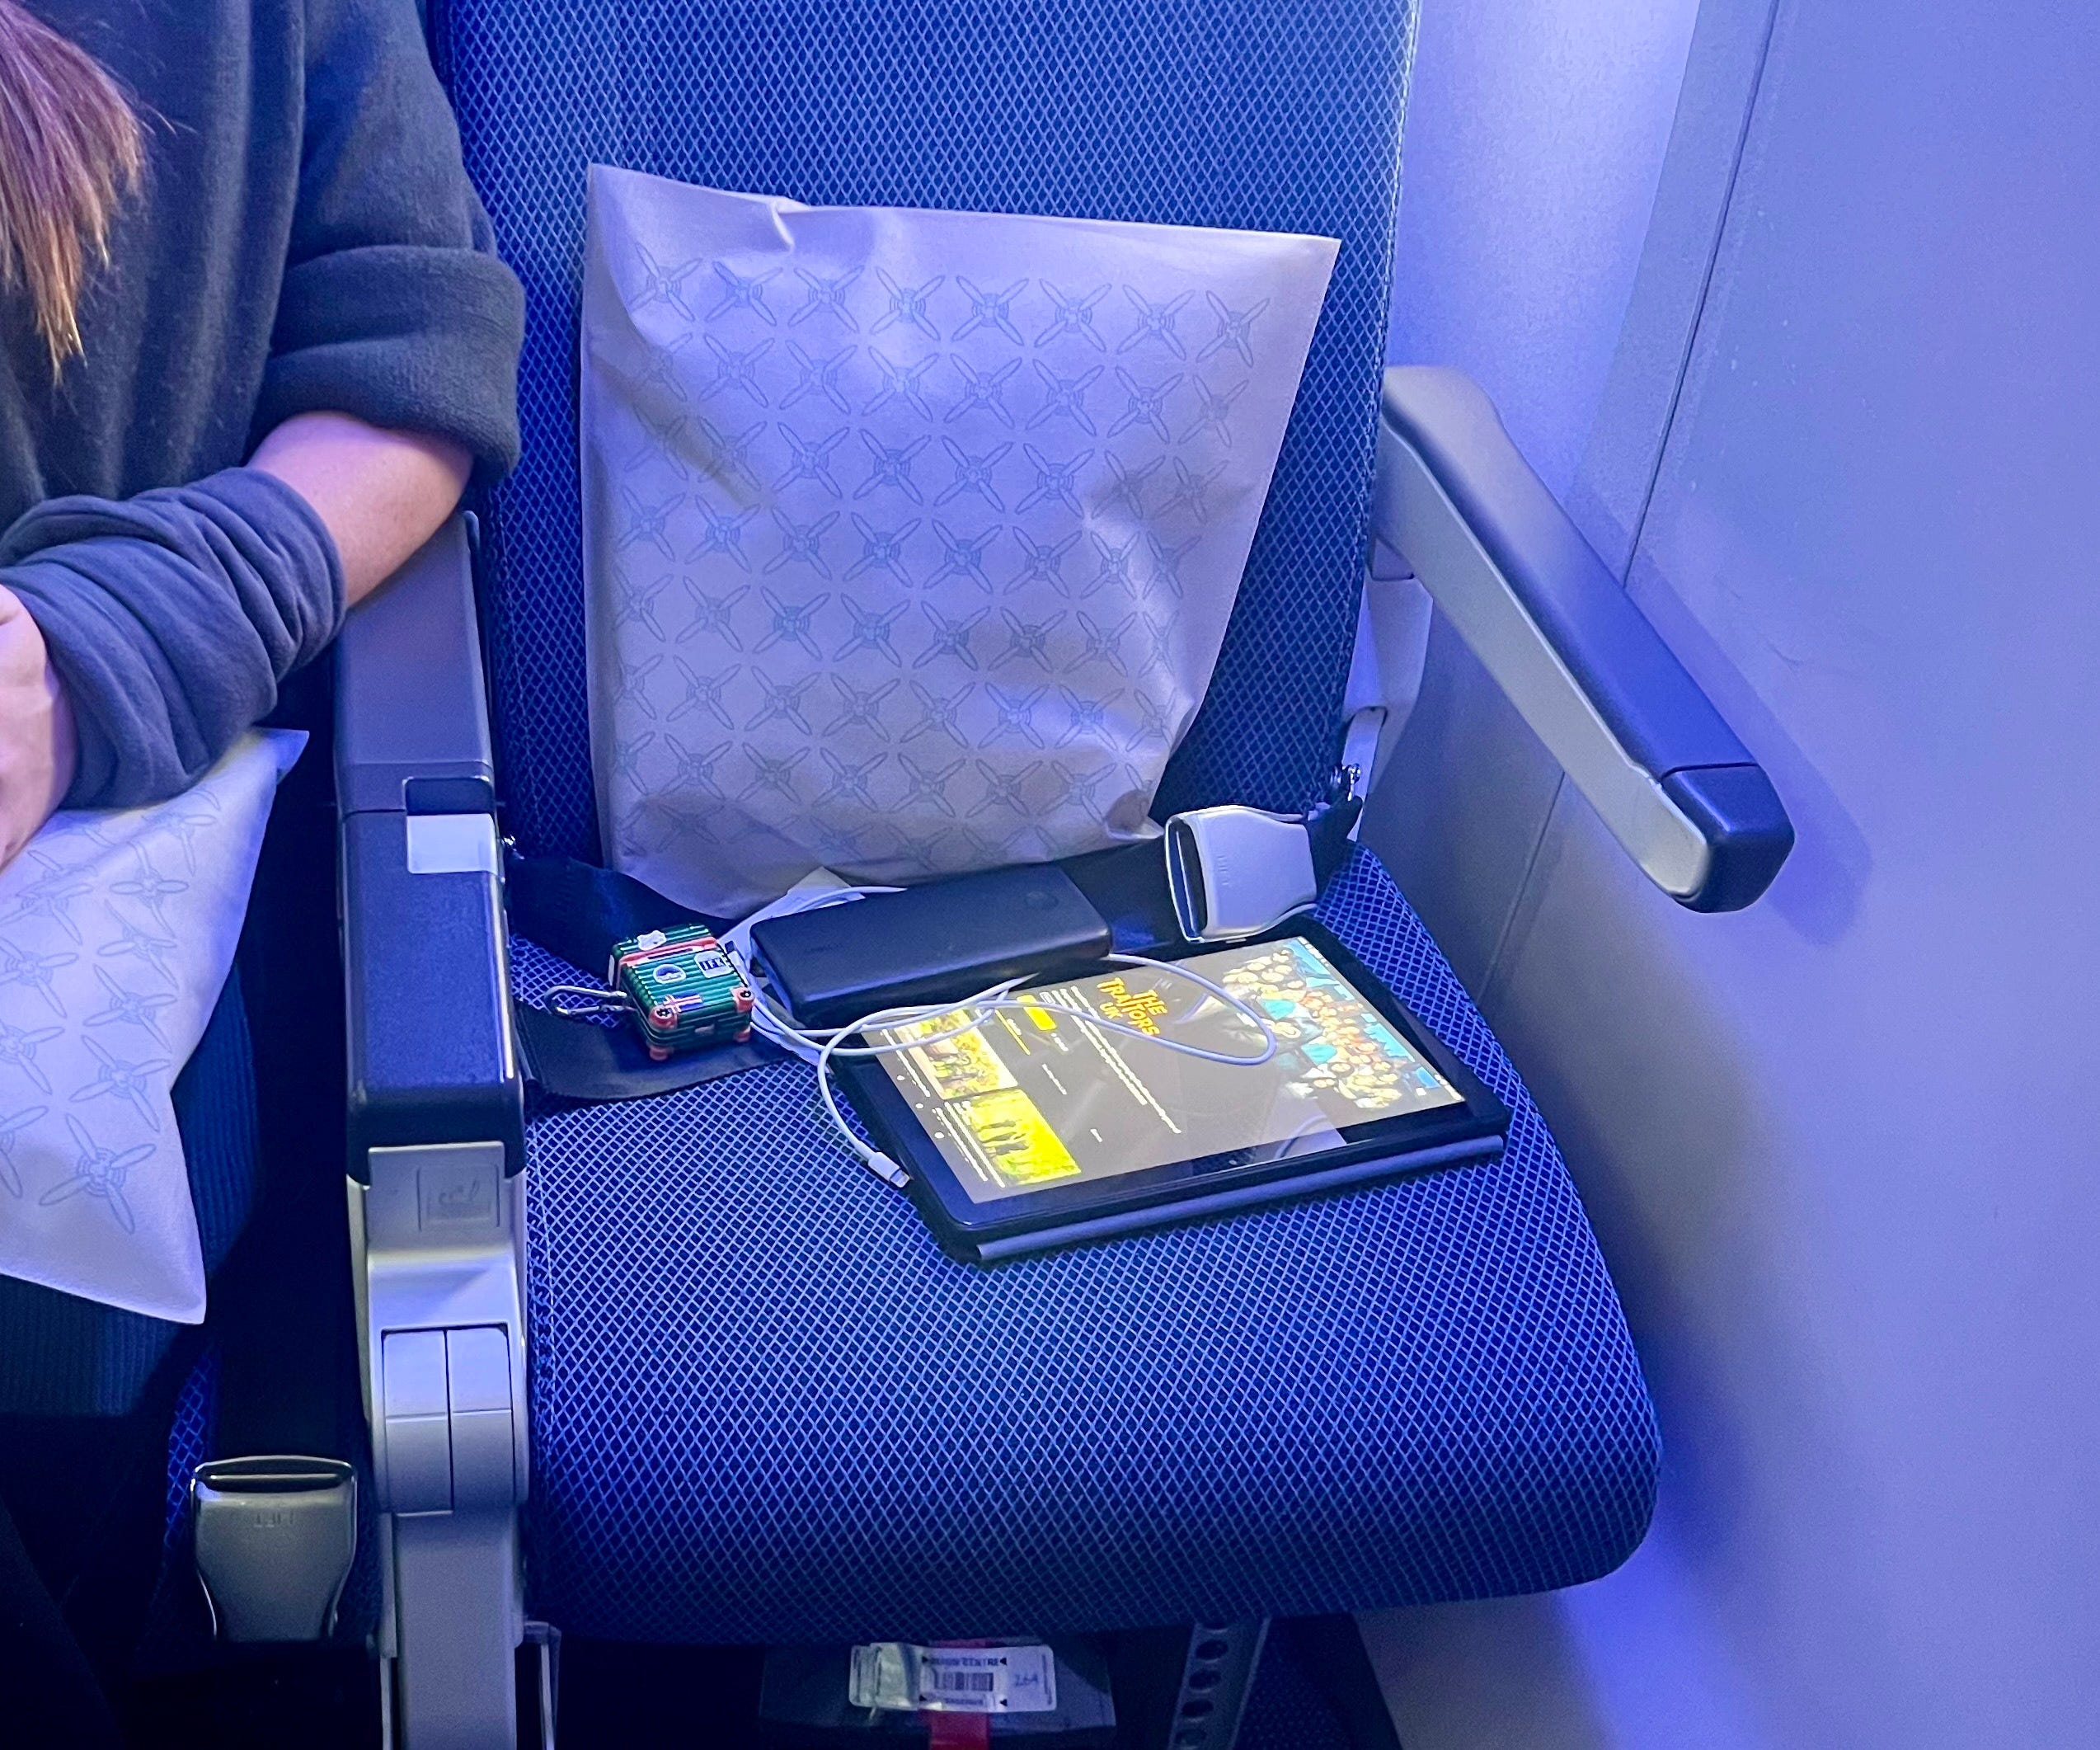 <p>In my experience, <a href="https://www.businessinsider.com/flew-united-economy-and-mediocre-compared-to-asian-airlines-2023-8#the-seat-was-as-i-remembered-it-with-a-seatback-screen-and-power-ports-as-well-as-the-ever-important-headrest-that-i-need-for-sleep-5">United has slimmer seats</a> that can get uncomfortable after six or seven hours across the Atlantic. </p><p>I didn't find this to be an issue on the British Airways flight to London, though.</p>